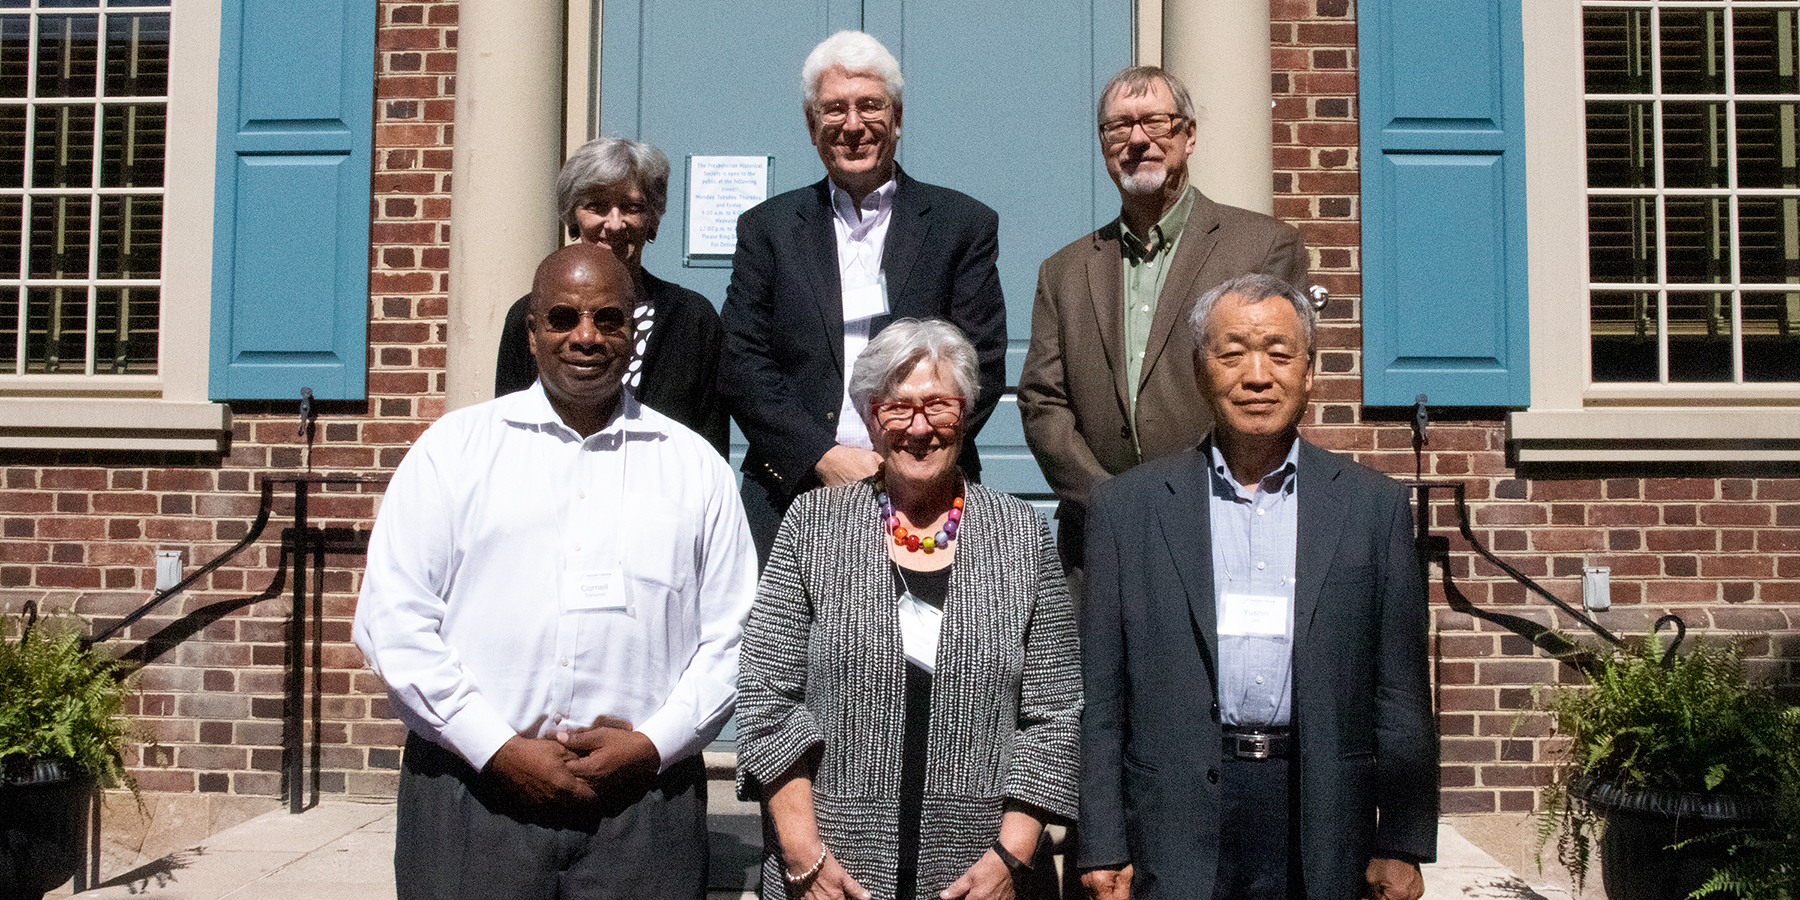 New PHS Board members, September 2019. Front (l to r): Rev. Dr. Cornell Edmonds, Marsha Heimann, Dr. Yushin Lee; Back (l to r): Rev. Cindy Jarvis, Mike Meloy, Tim Hoogland